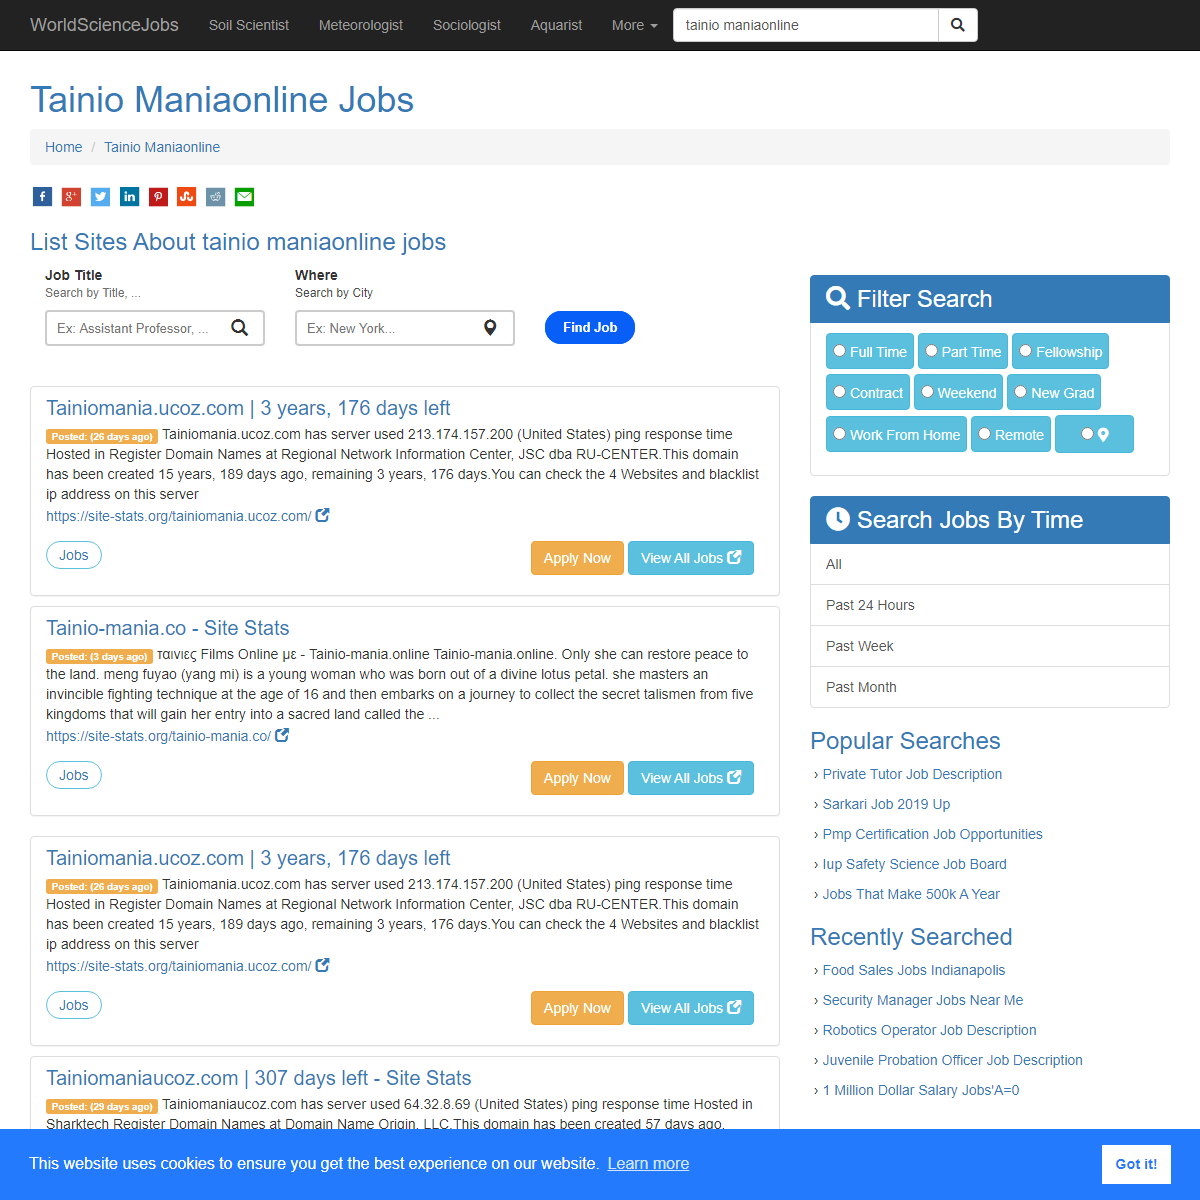 A complete backup of https://worldsciencejobs.com/tainio-maniaonline